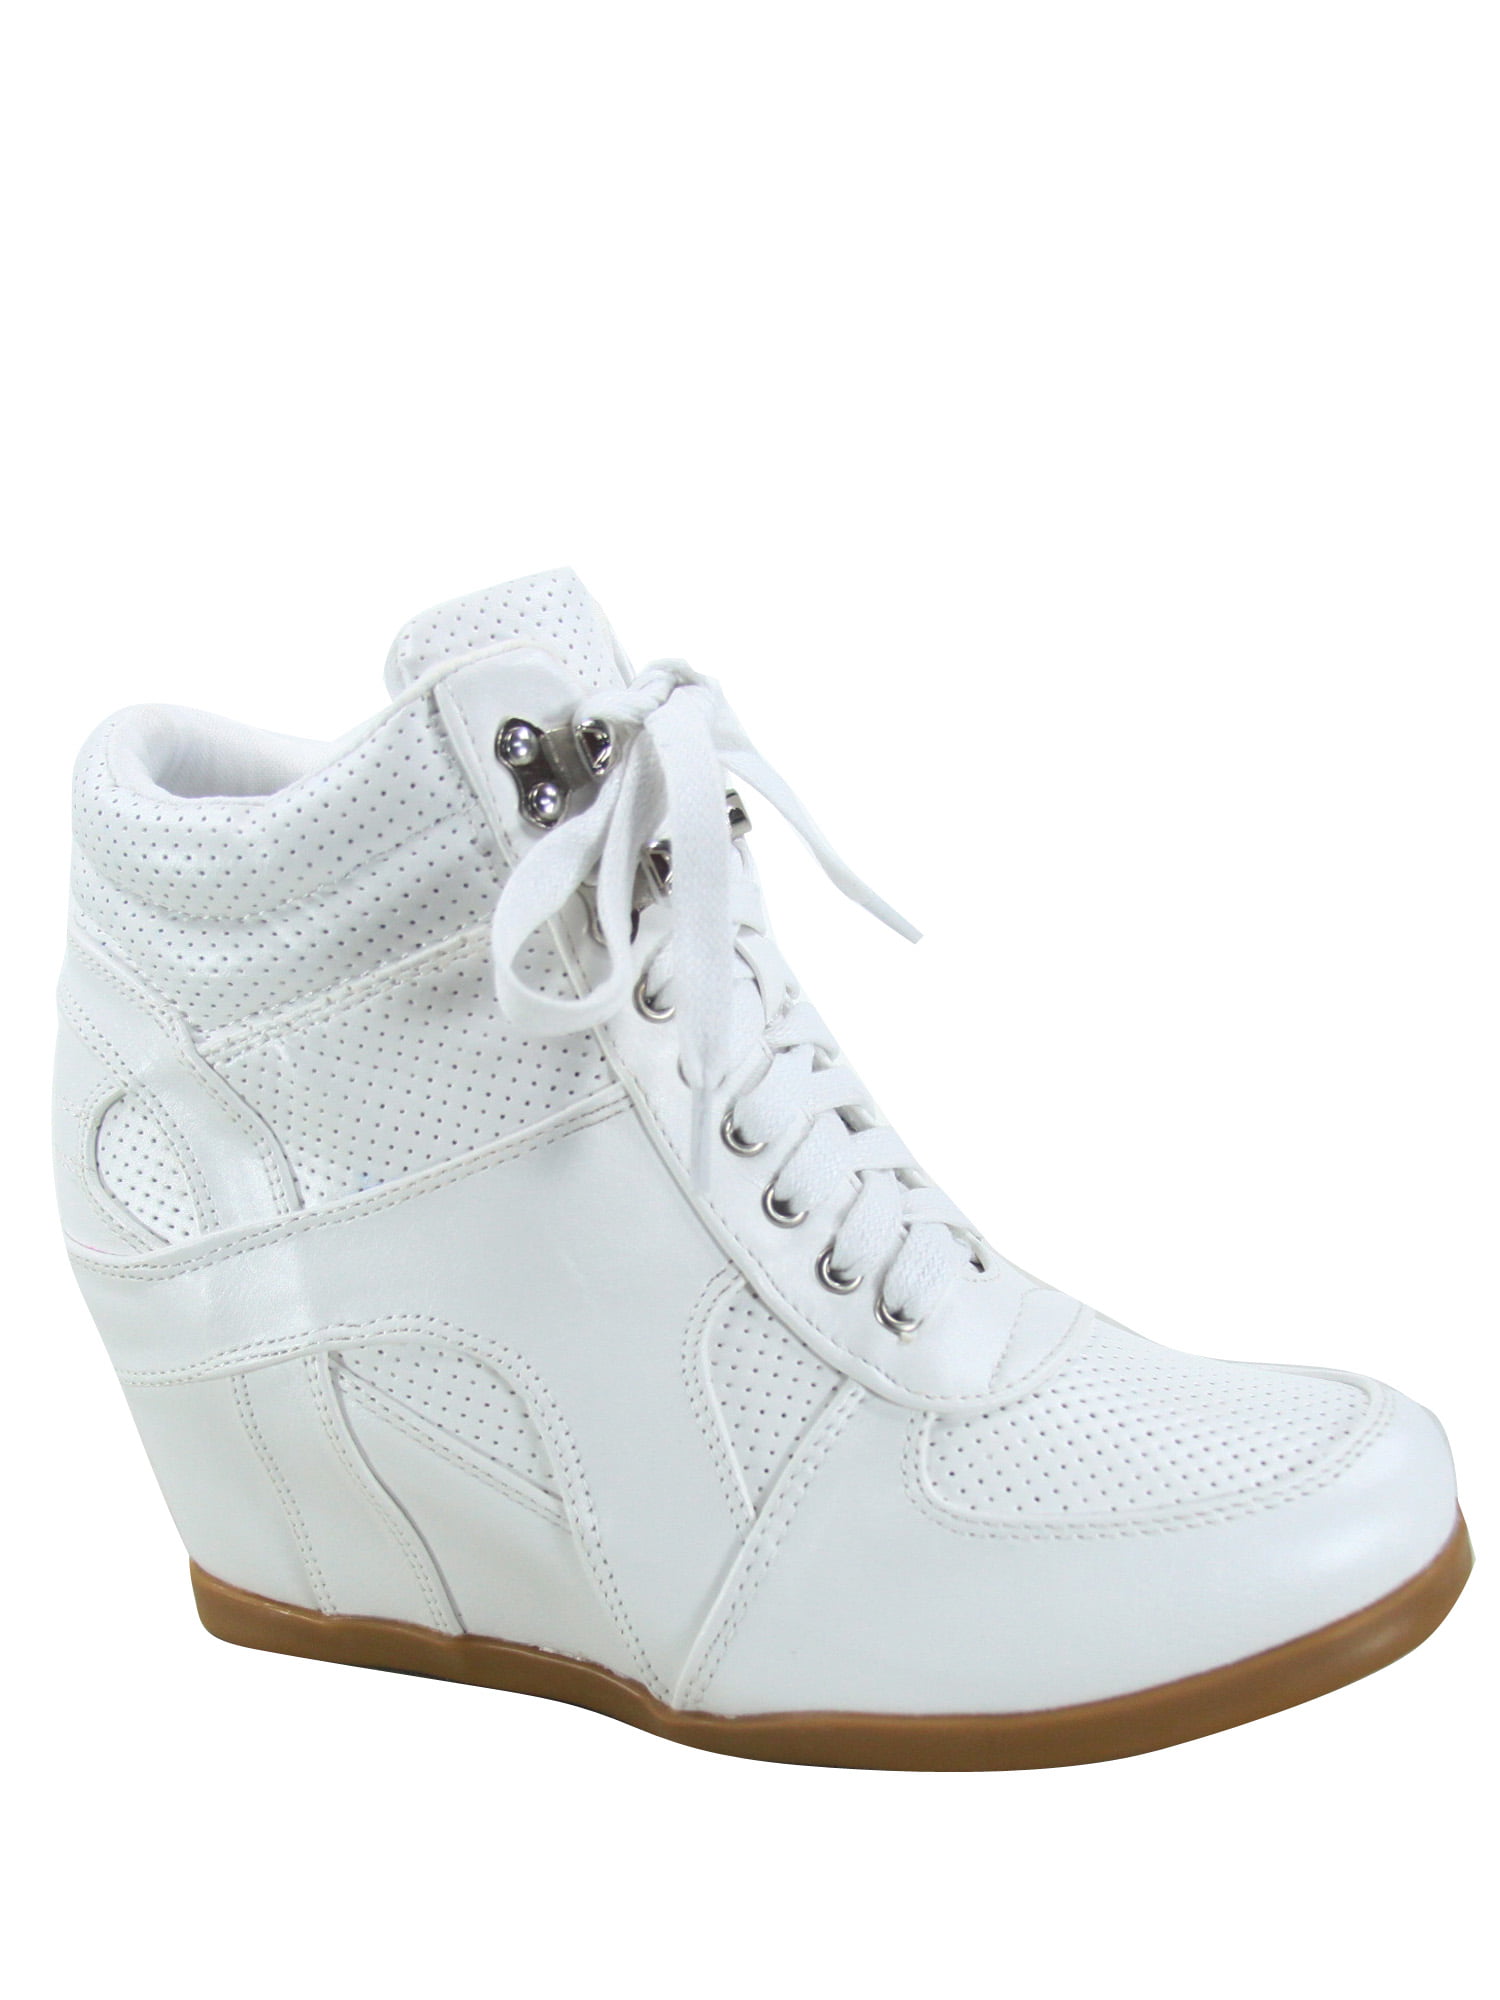 Womens Hidden Wedge Heel Lace Up Zip High Top Casual Sneakers Athletic Shoes New 